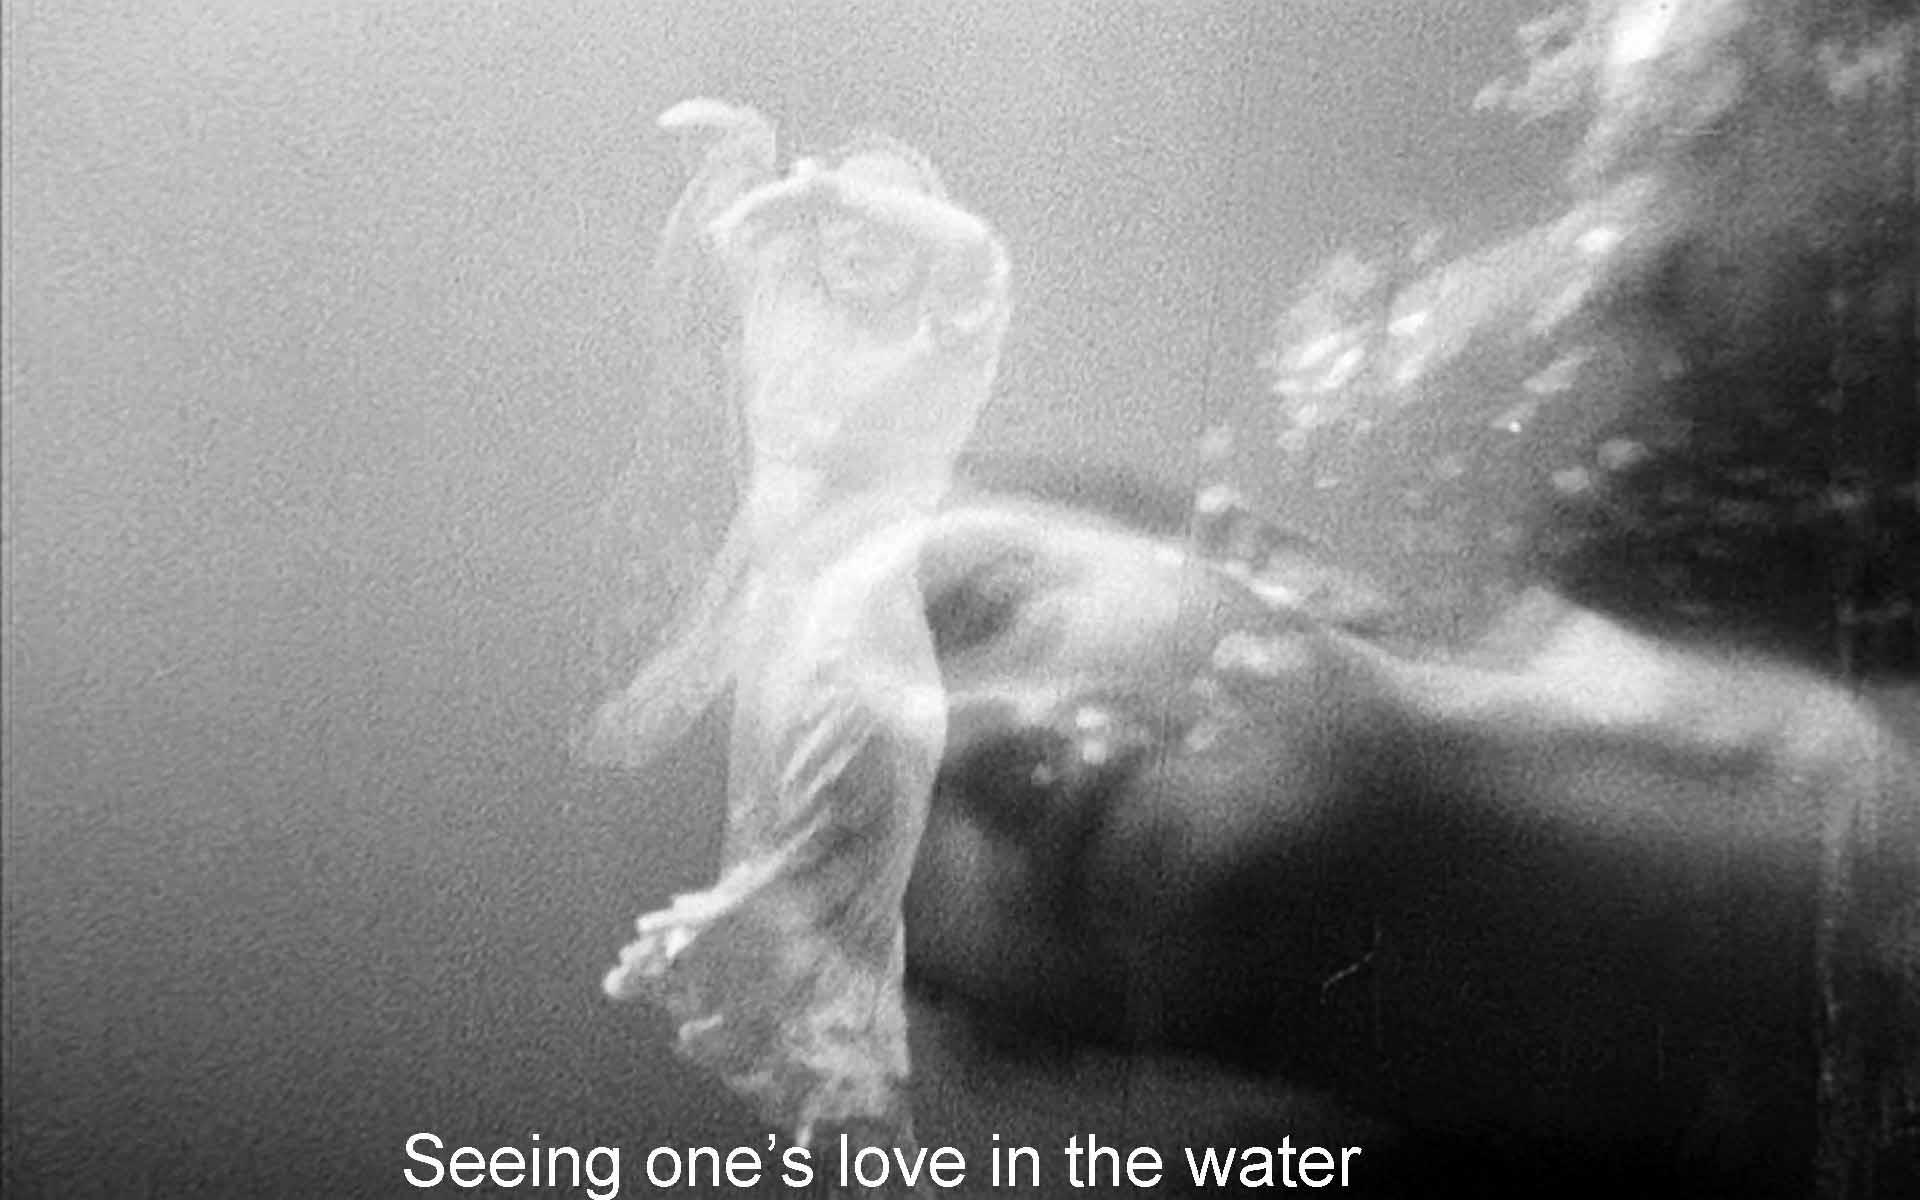 Seeing one’s love in the water